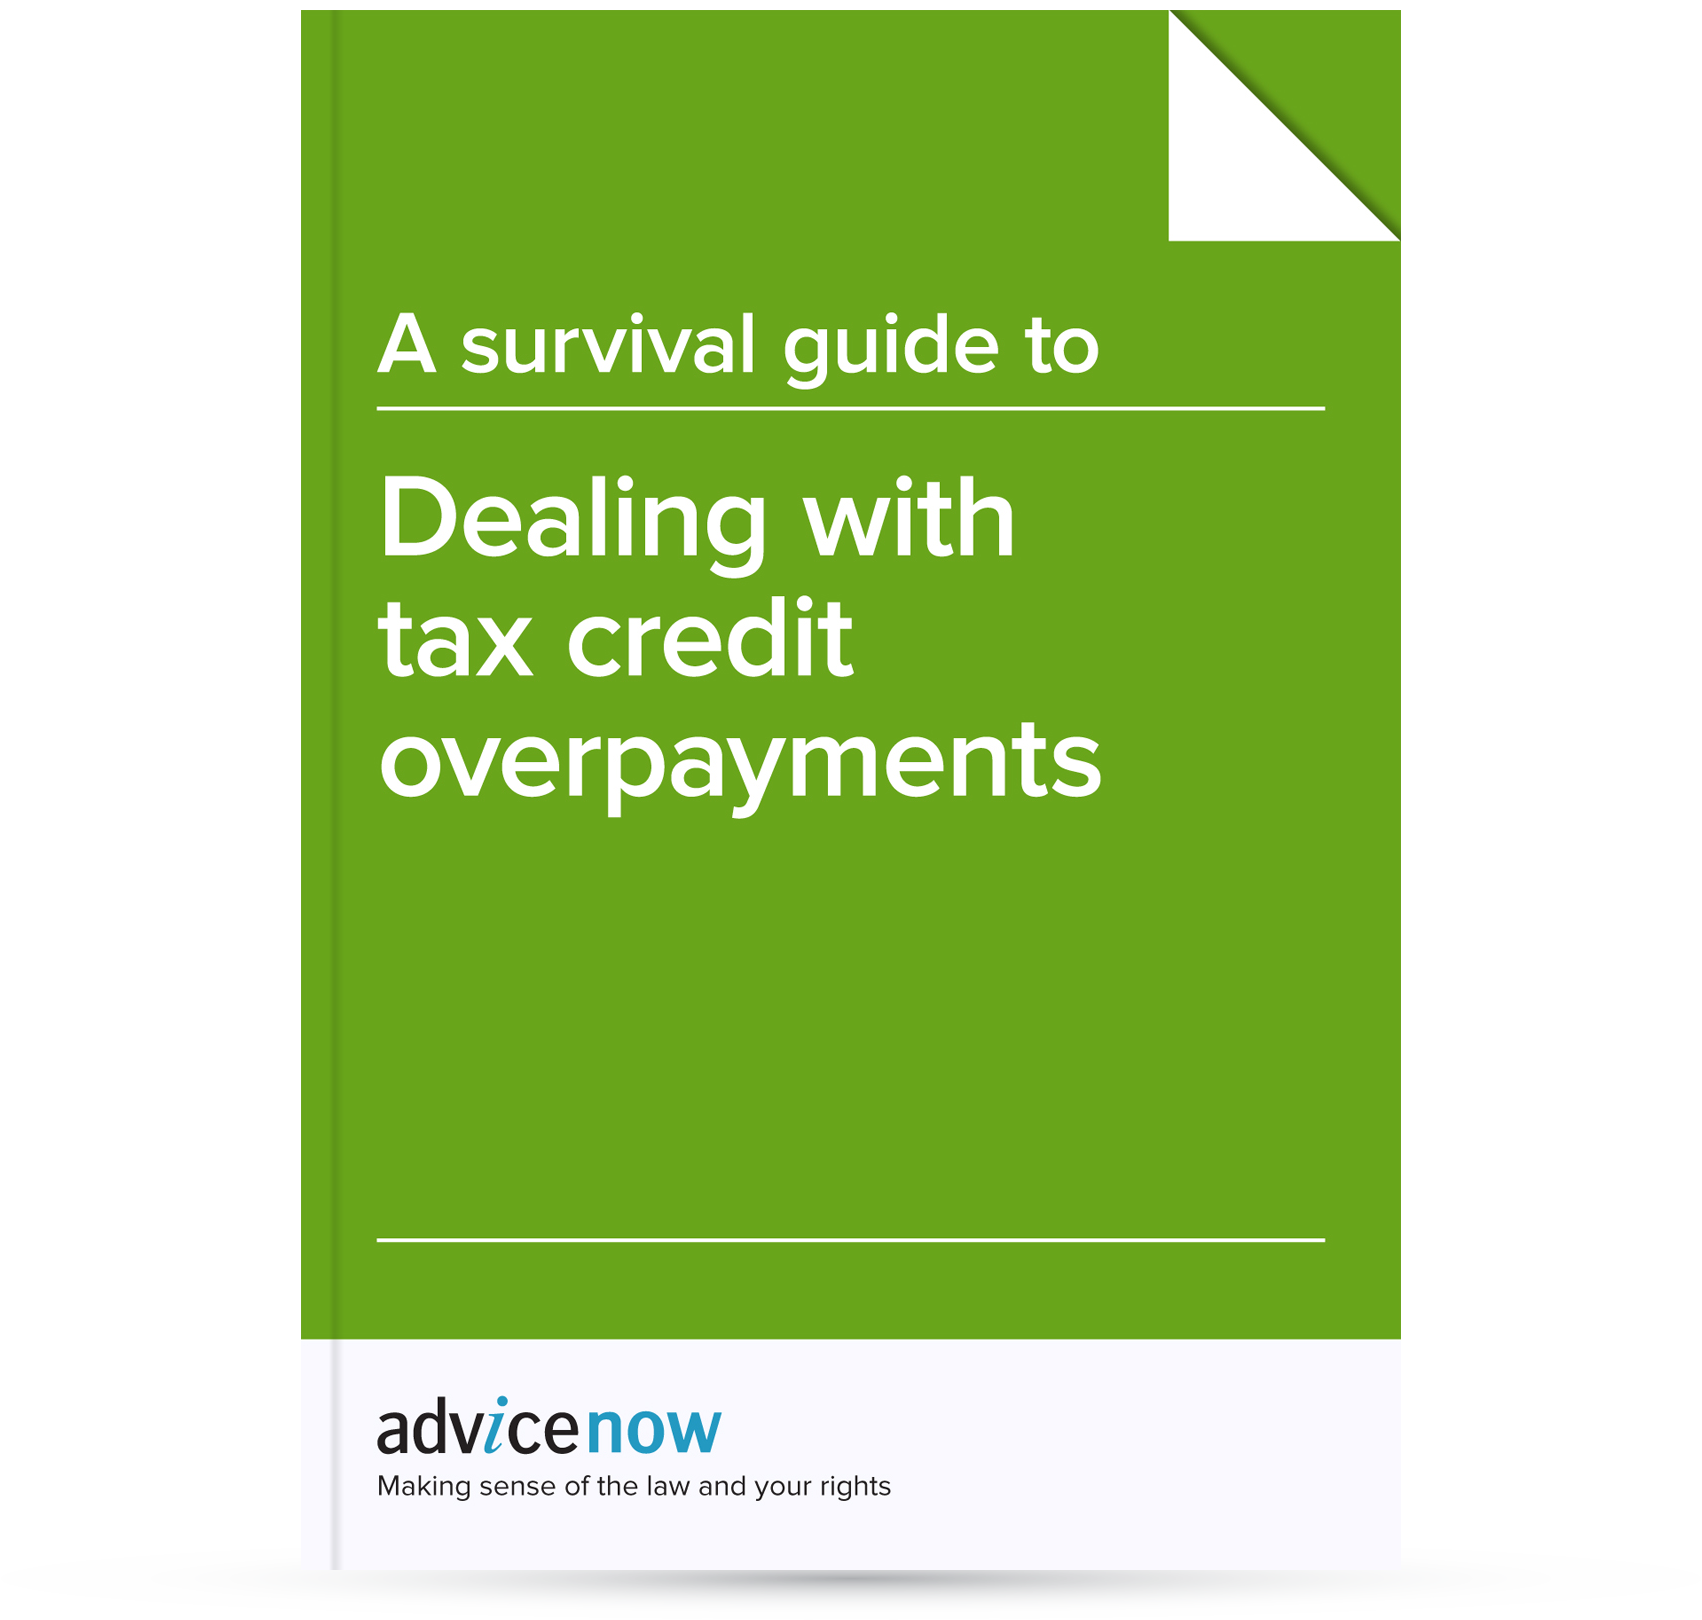 a-survival-guide-to-dealing-with-tax-credit-overpayments-advicenow